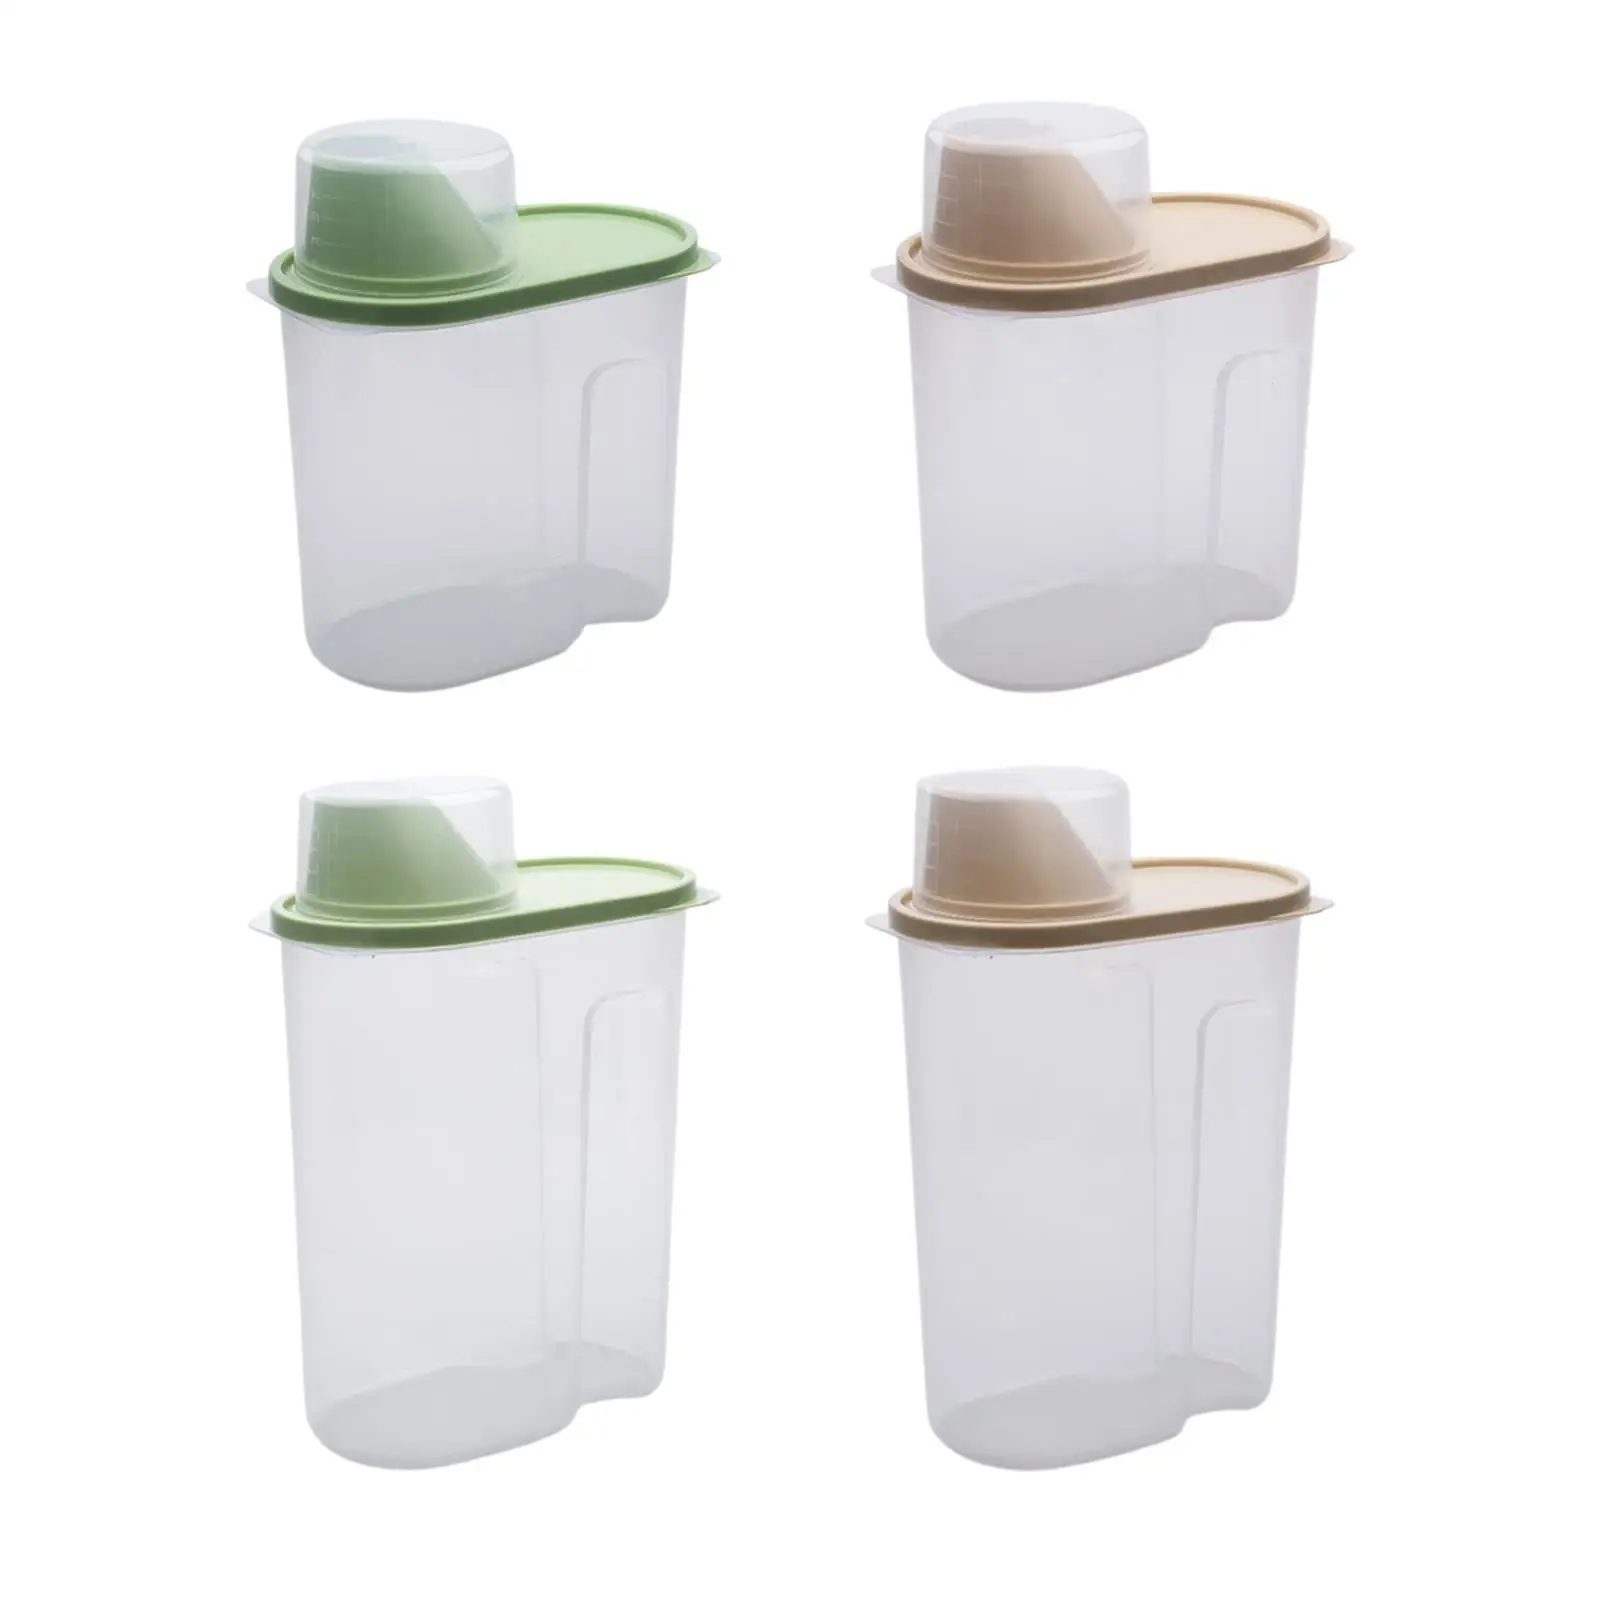 Dry Food Storage Container Pantry Organization for Grain Pasta Cookies